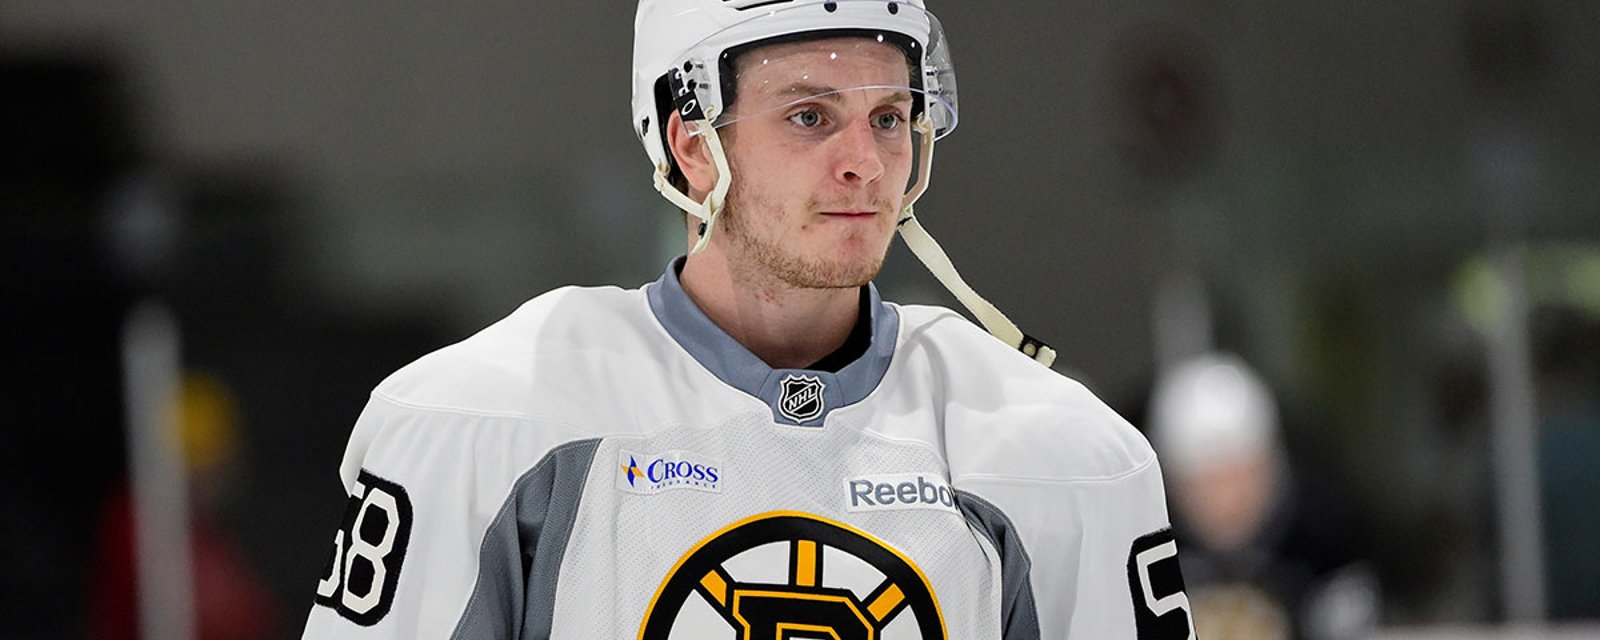 Bruins prospect sees himself as the “Next Marchand”